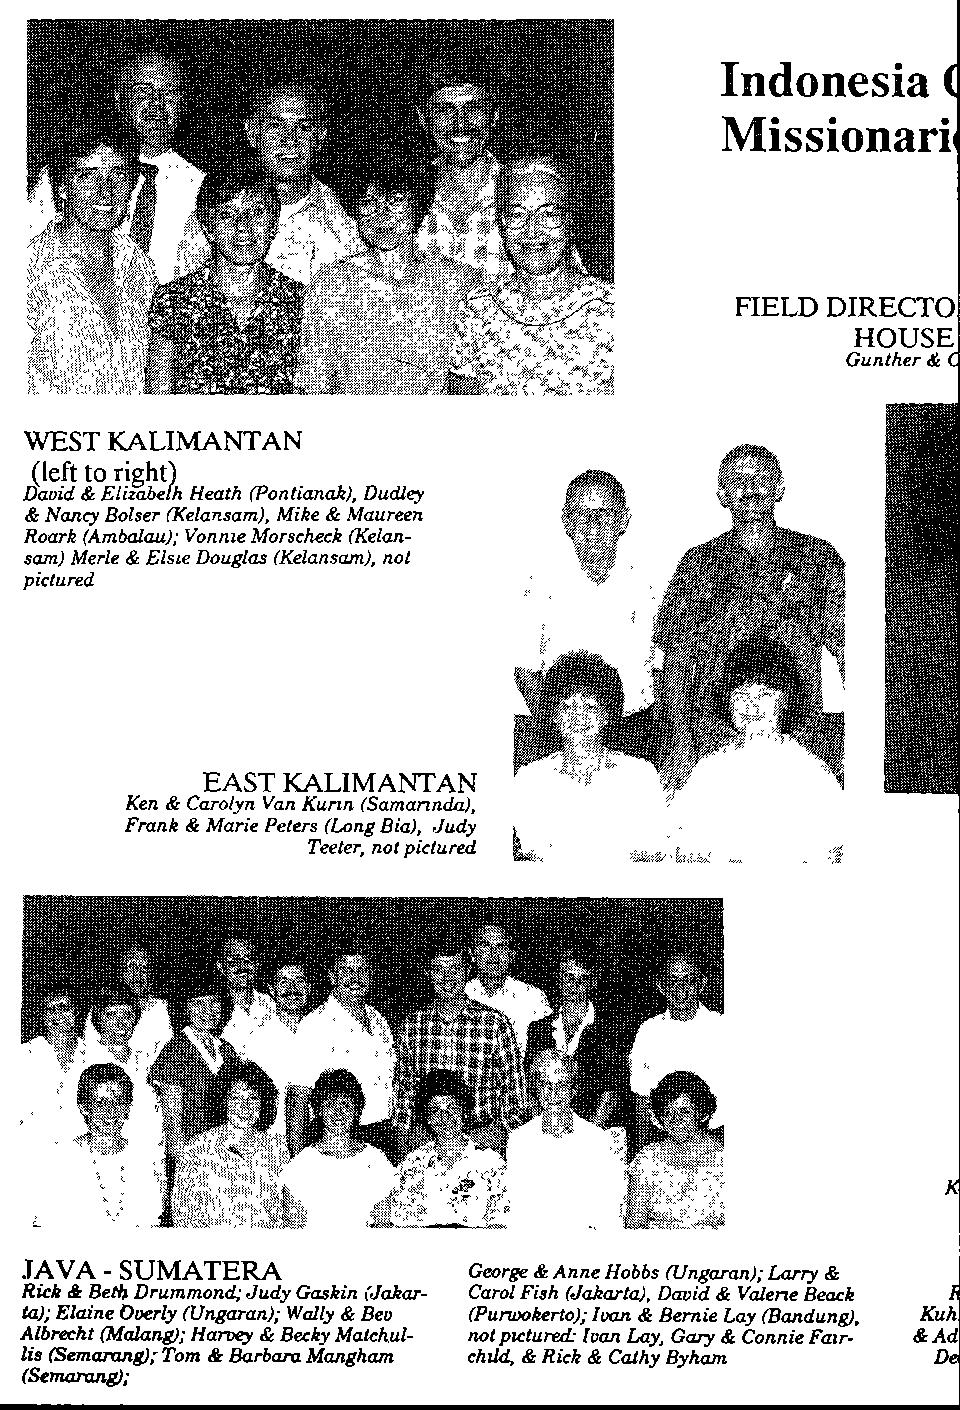 Indonesia ( Missionaril FIELD anther & WEST KALIMANTAN (left to right) Dautd & Eicz& h Heath Pontimtahj, Dudlq &Nay Bolser